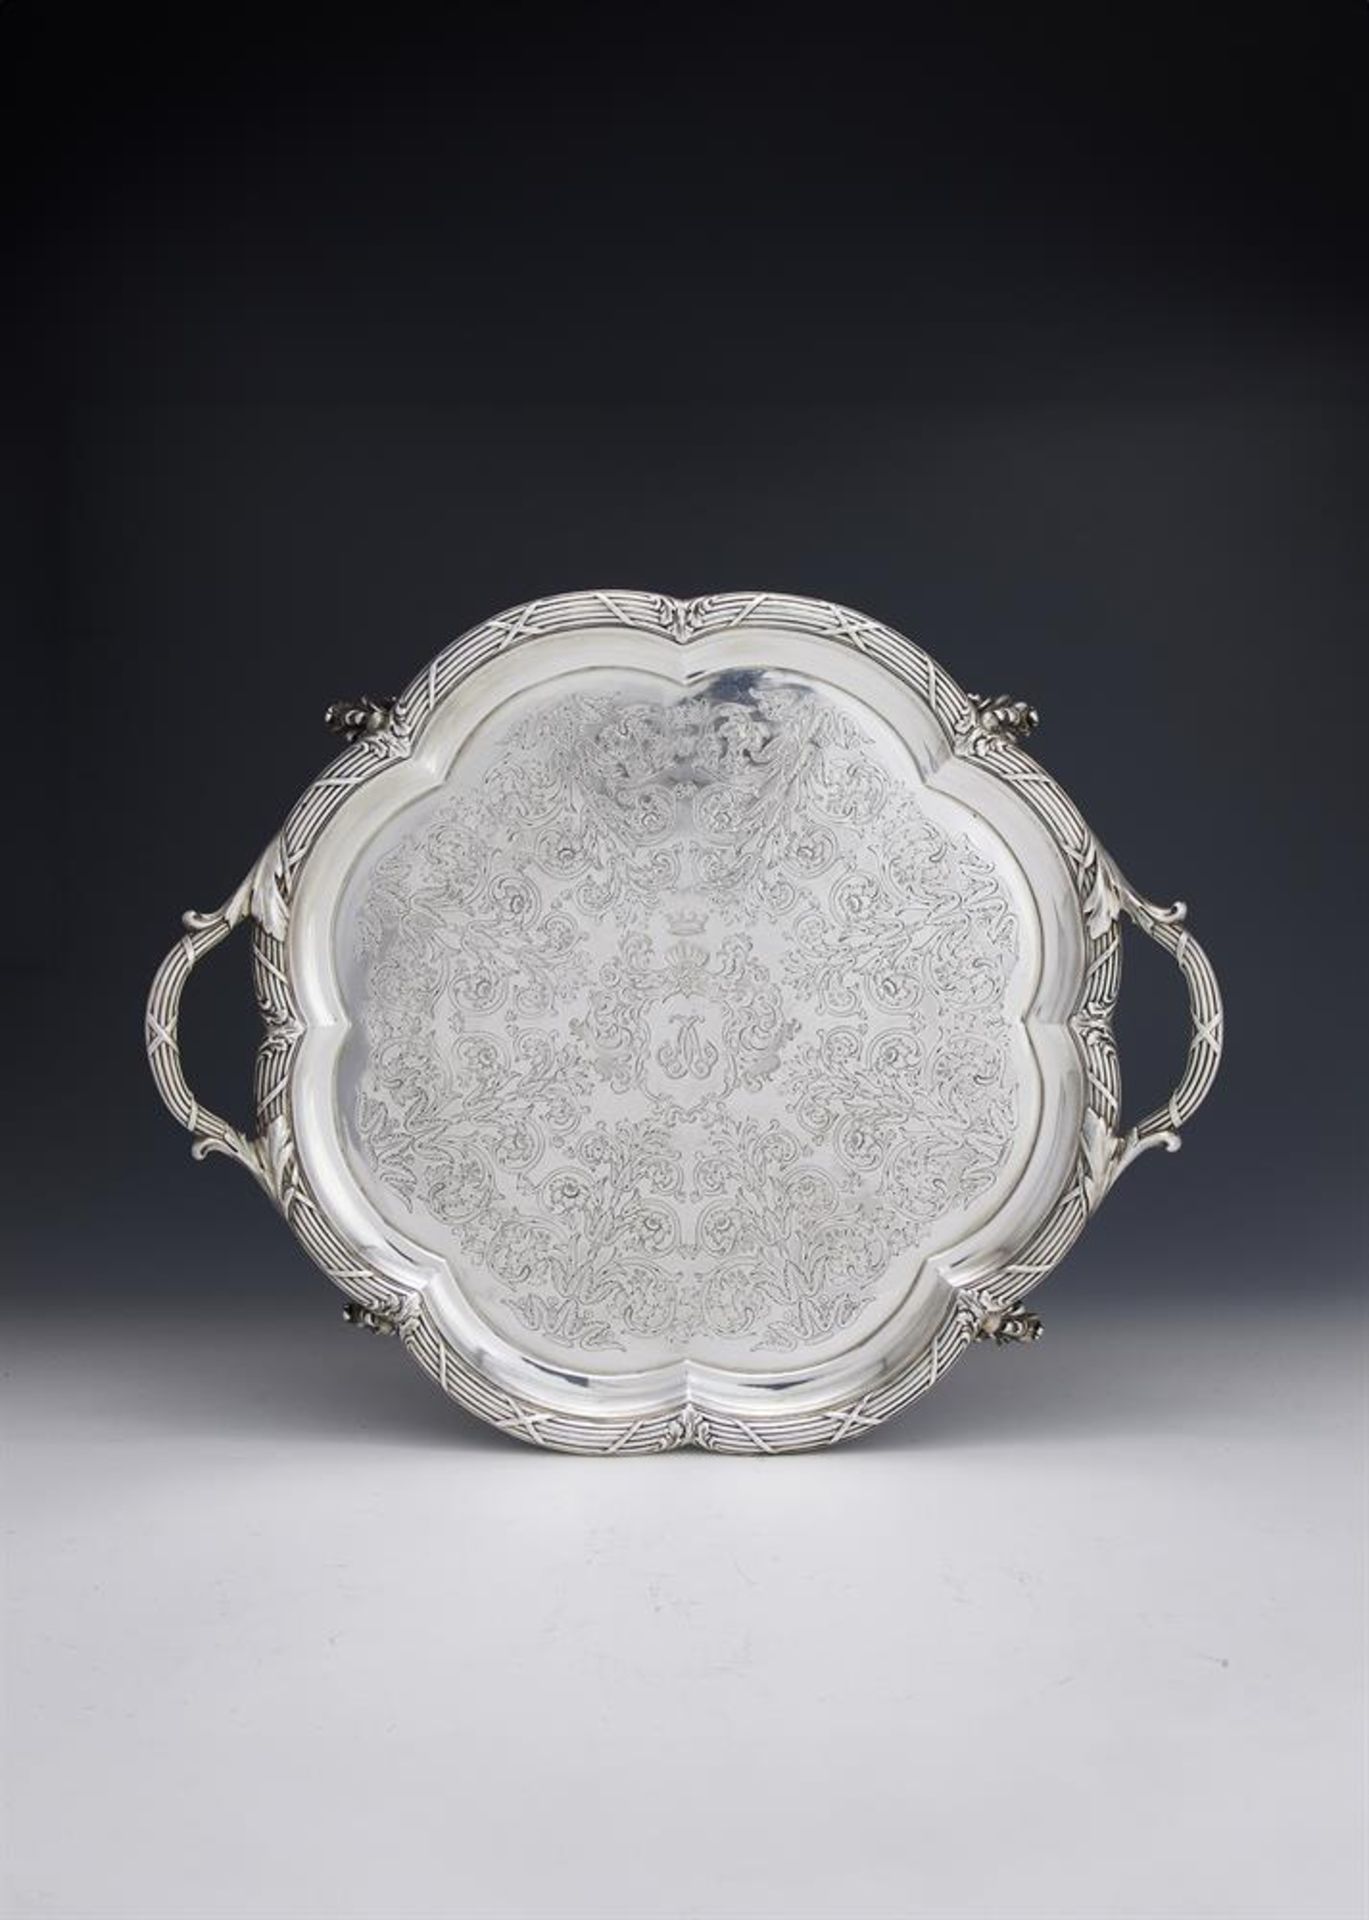 AN EARLY VICTORIAN SILVER TWIN HANDLED SHAPED CIRCULAR TRAY